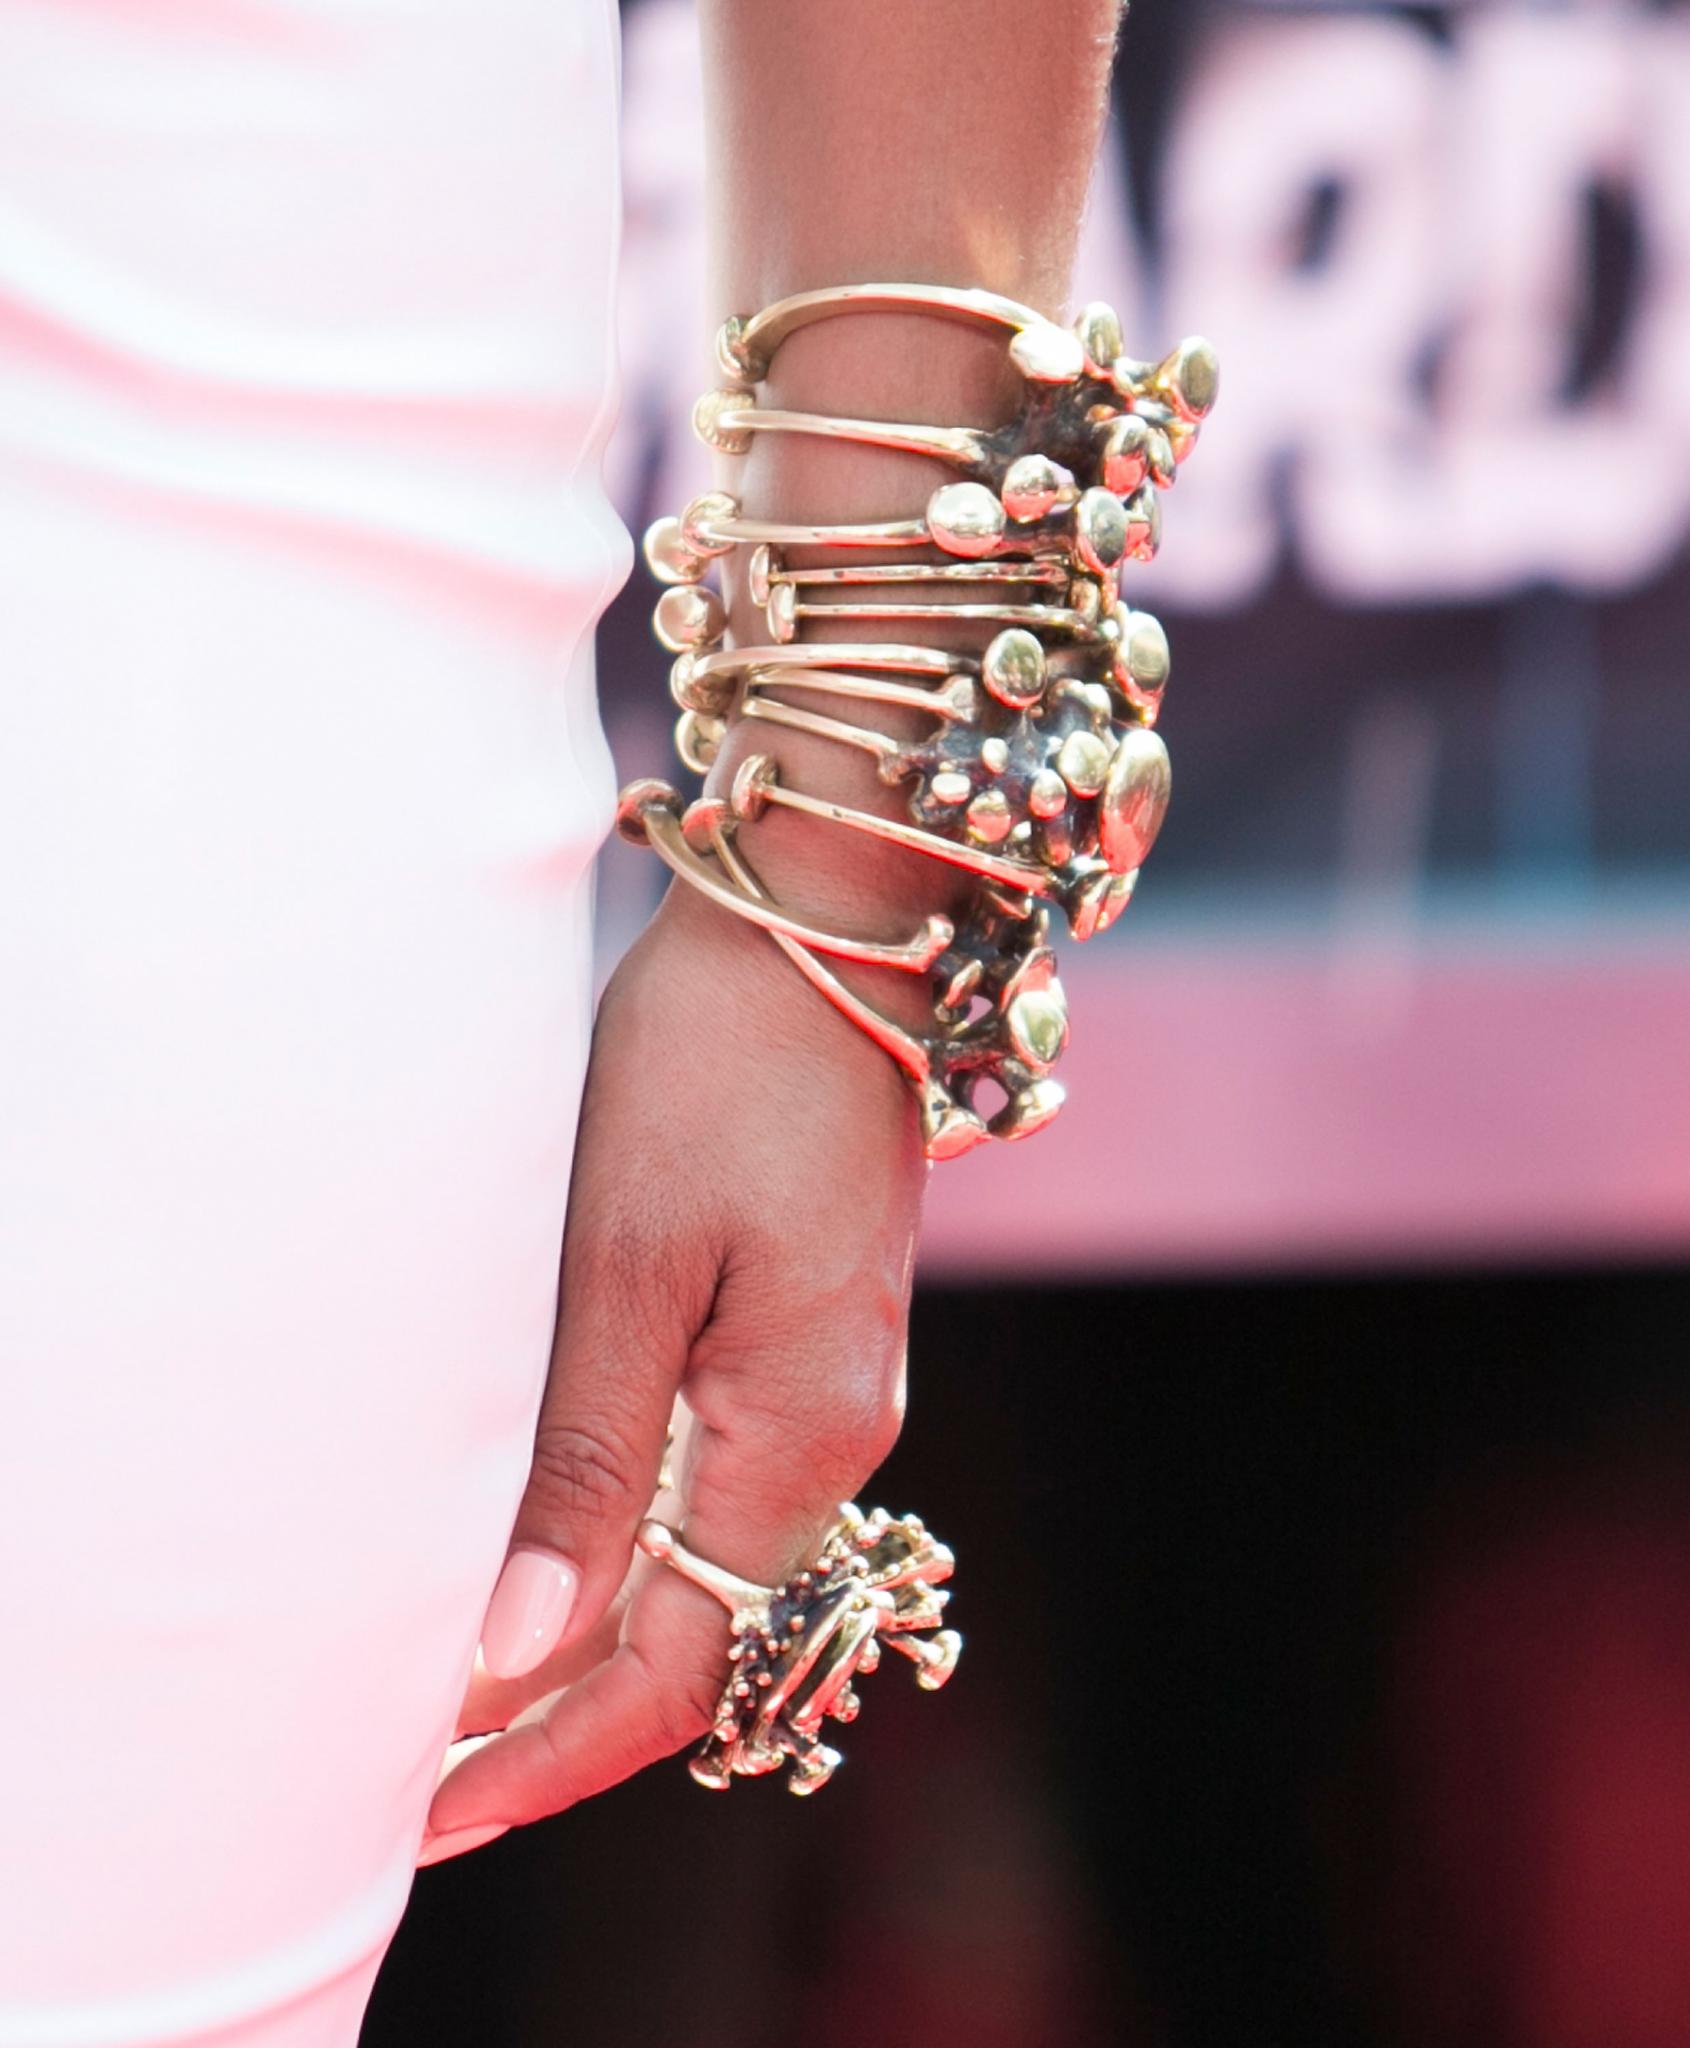 Accessories on Fleek: The Best Looks at the 2015 BET Awards
